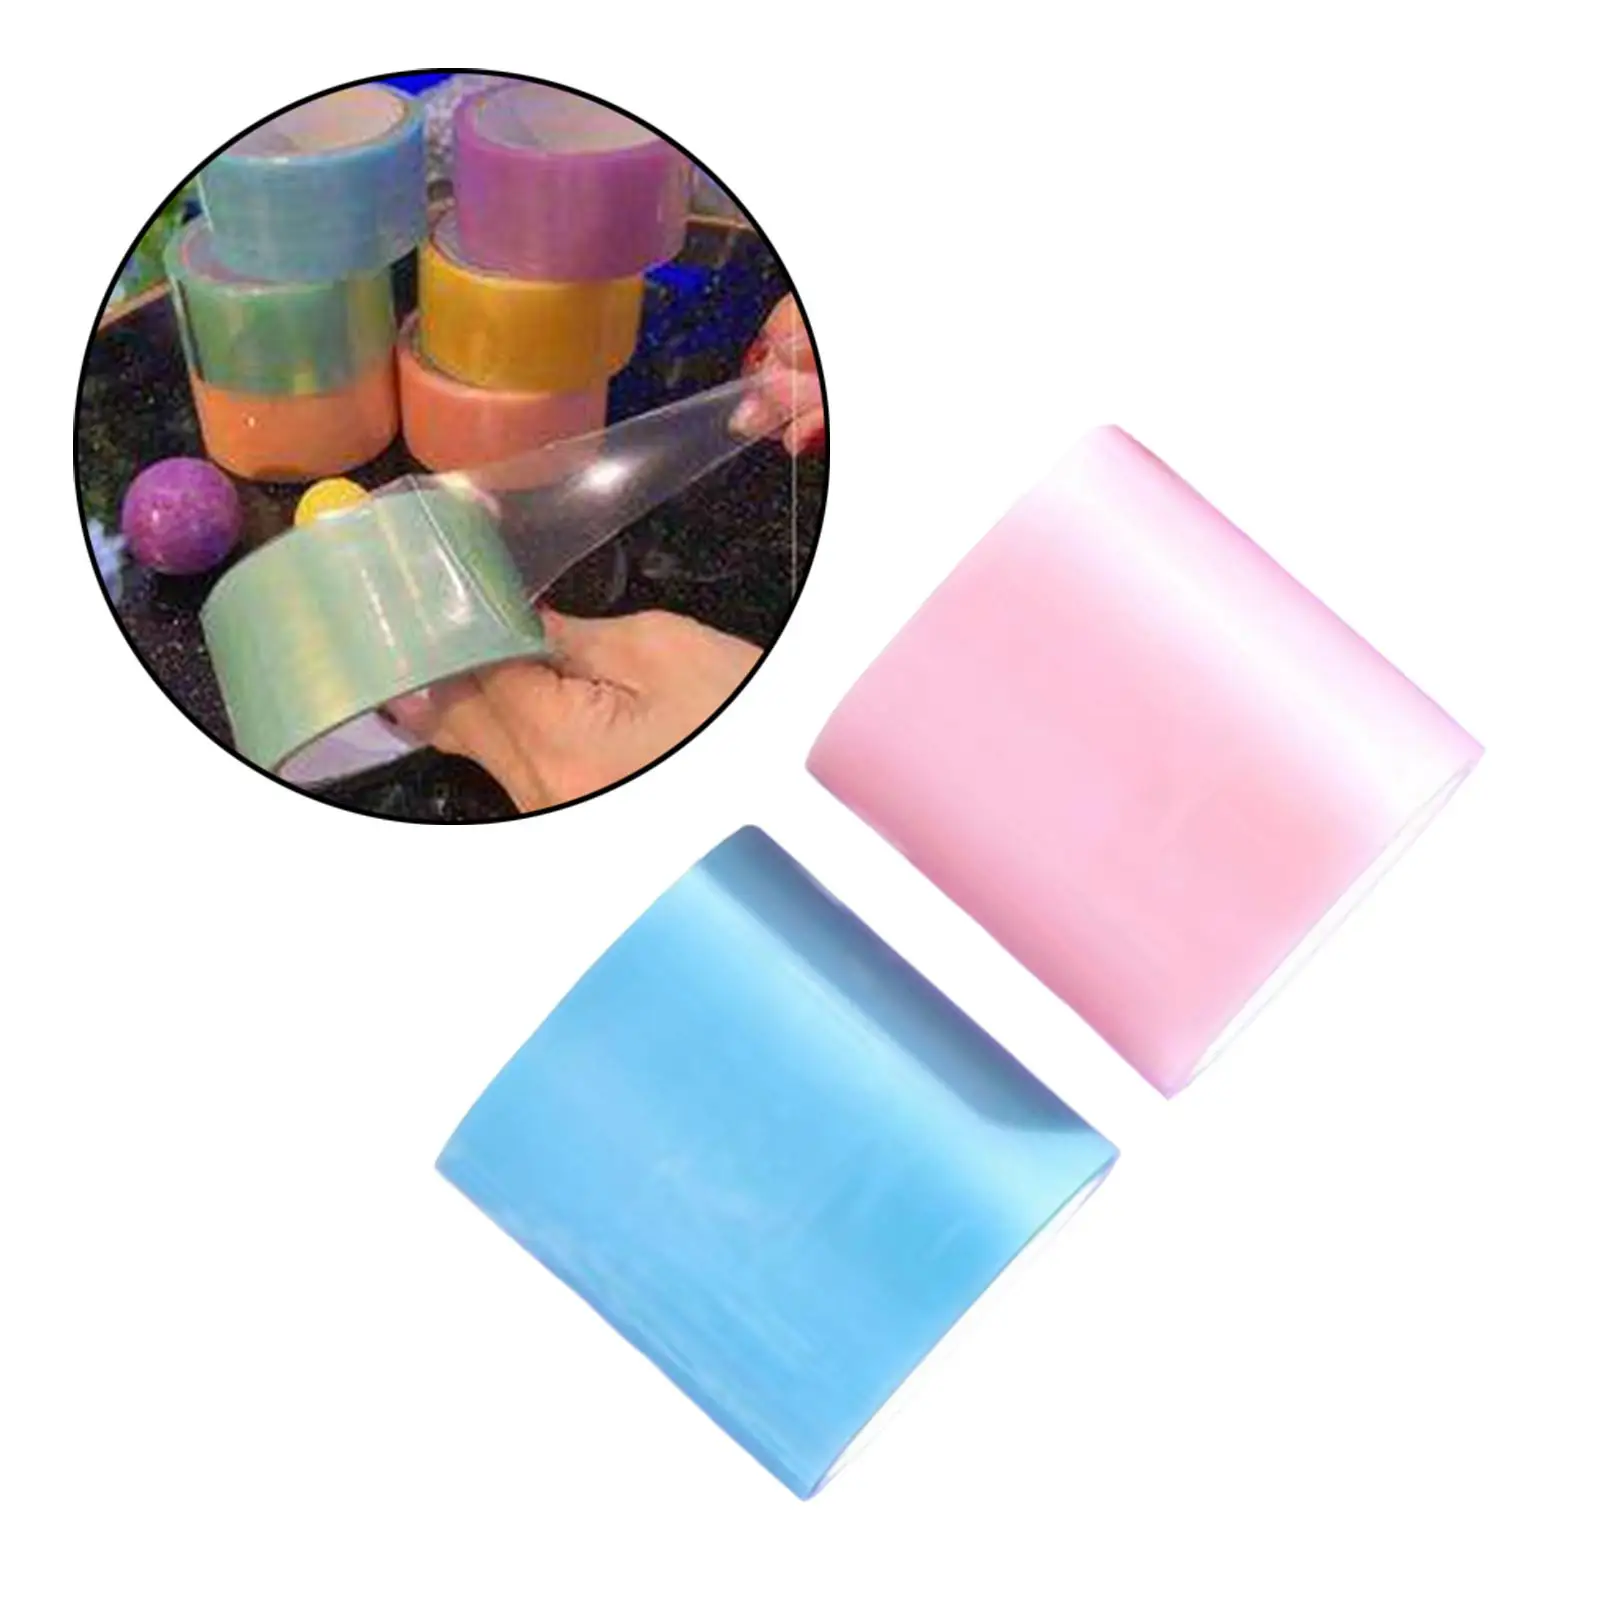 2Pcs Colorful Sticky Ball Tapes Sensory Toys Ornament Colored Ball Tape Educational Handmade DIY Making Ball for Adult Kids